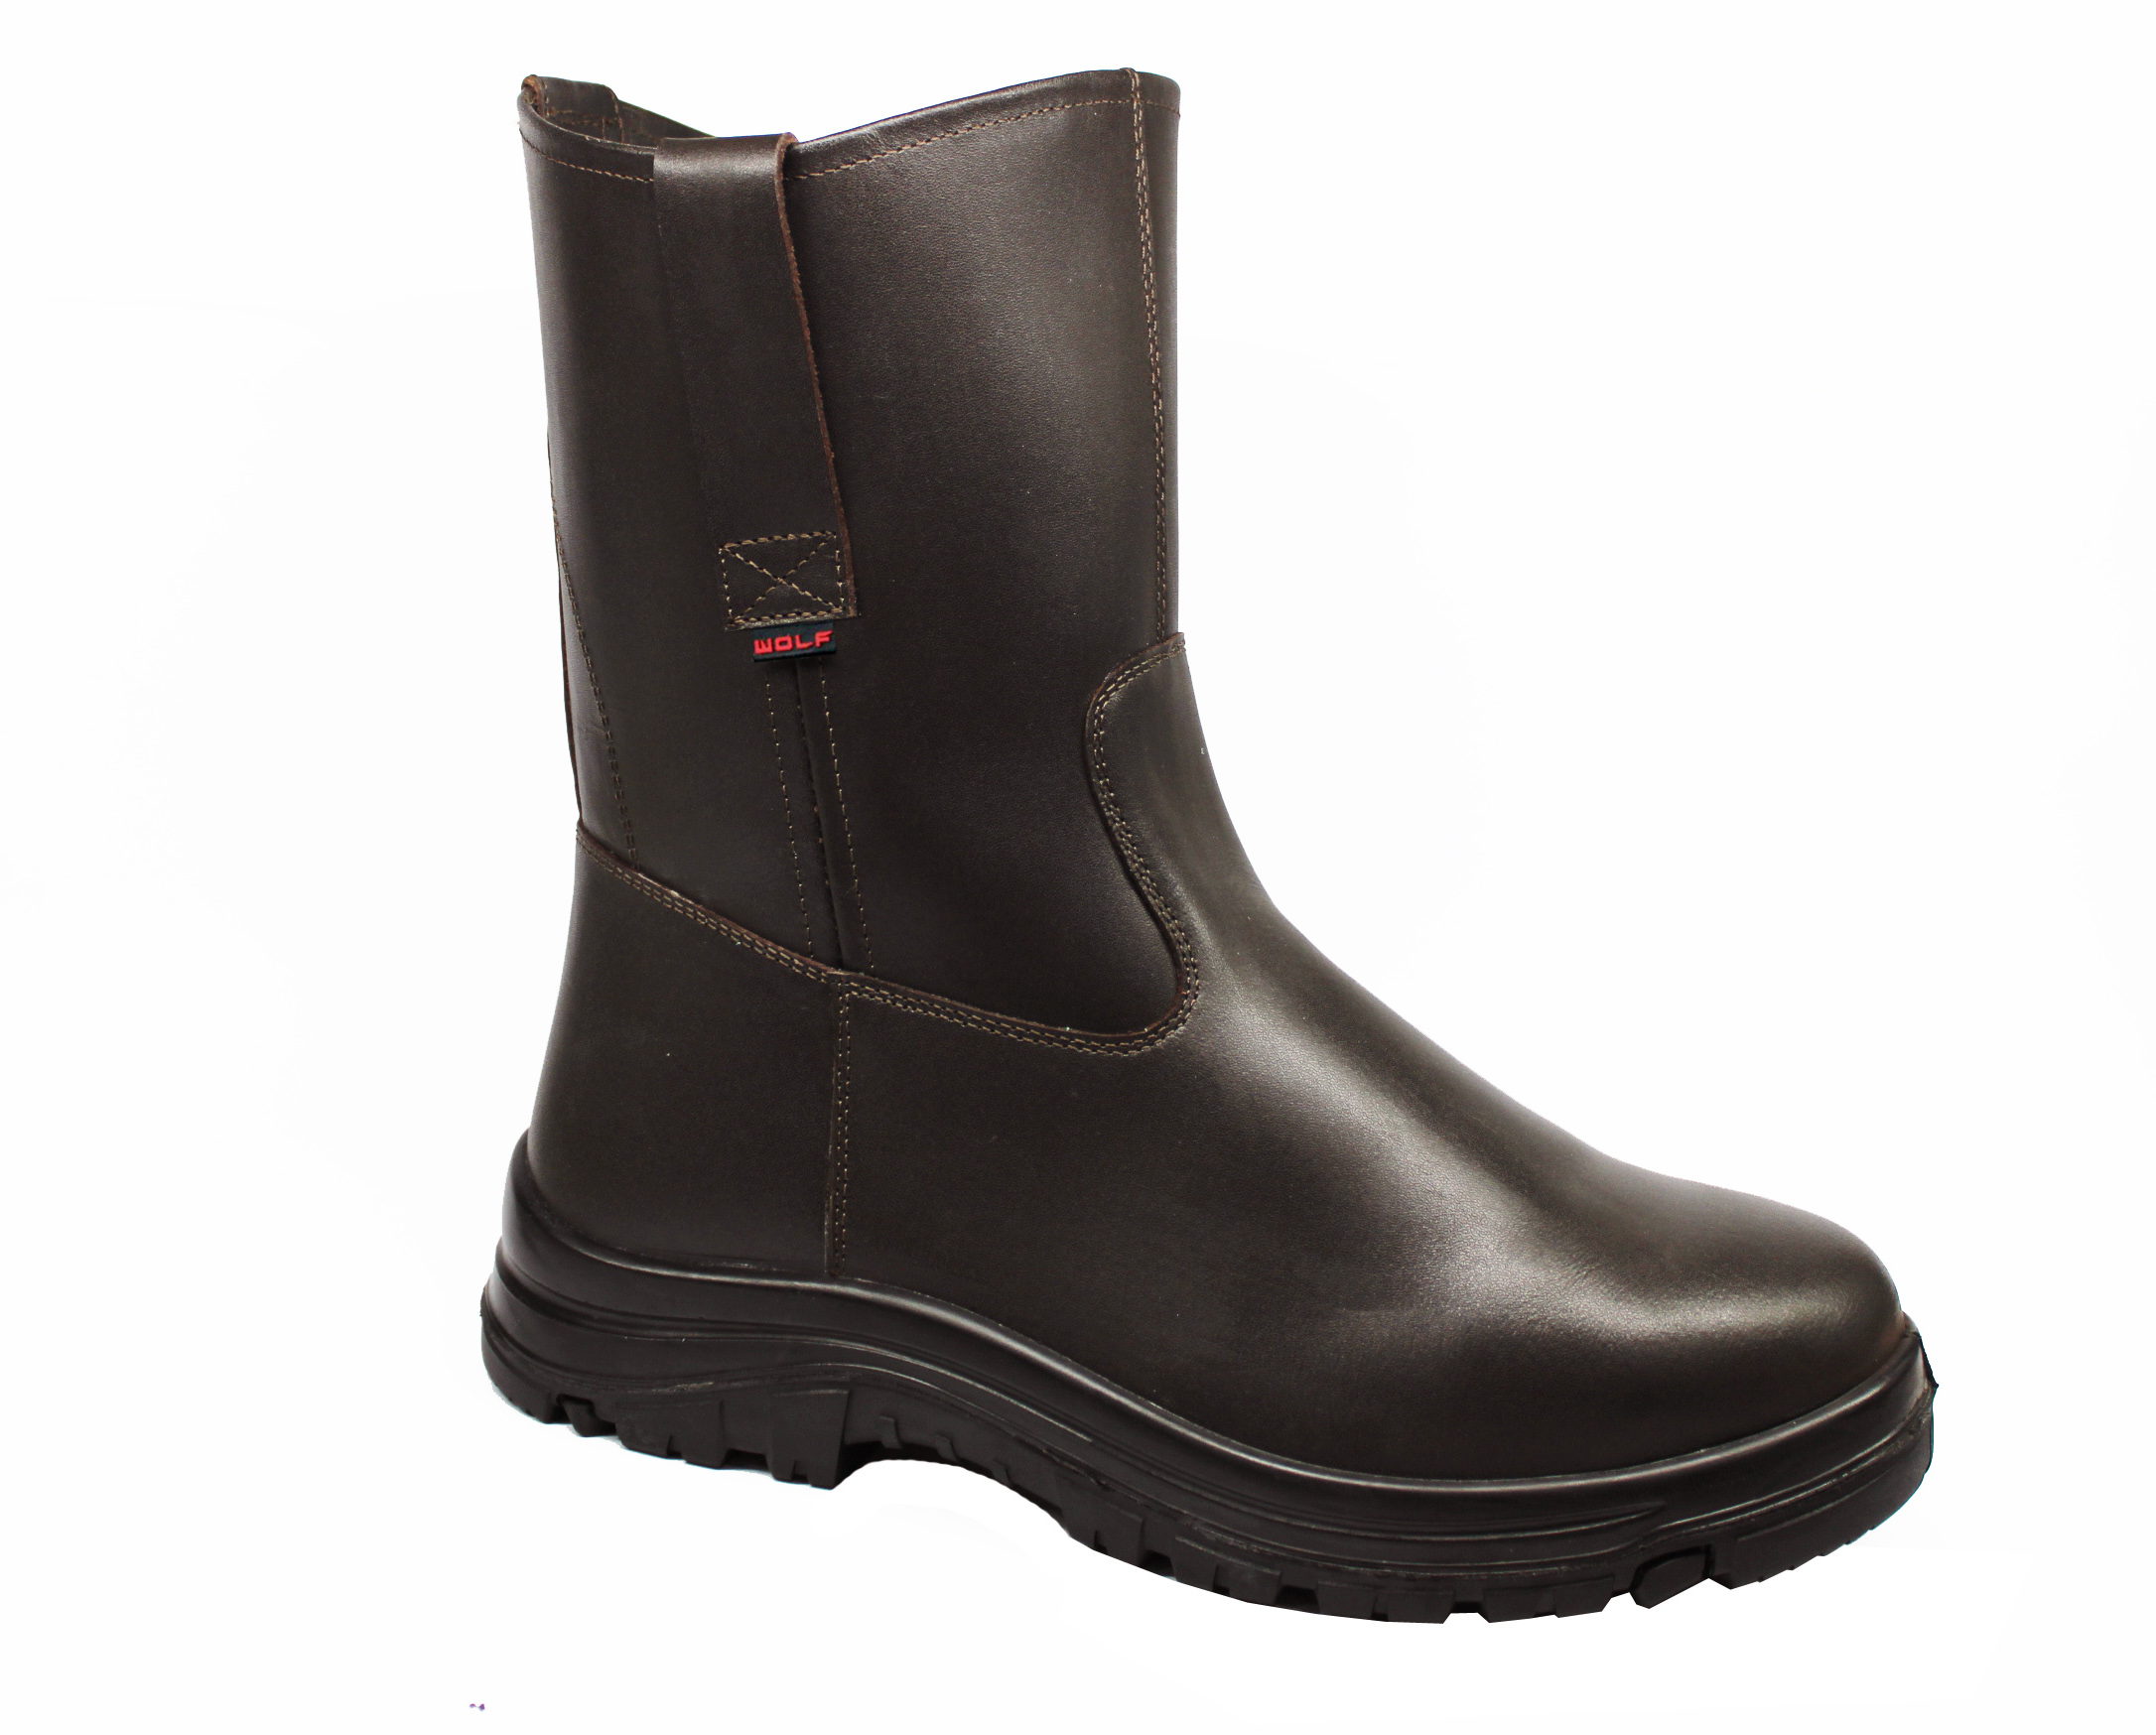 Double Density PU/Rubber Safety Rigger Boot